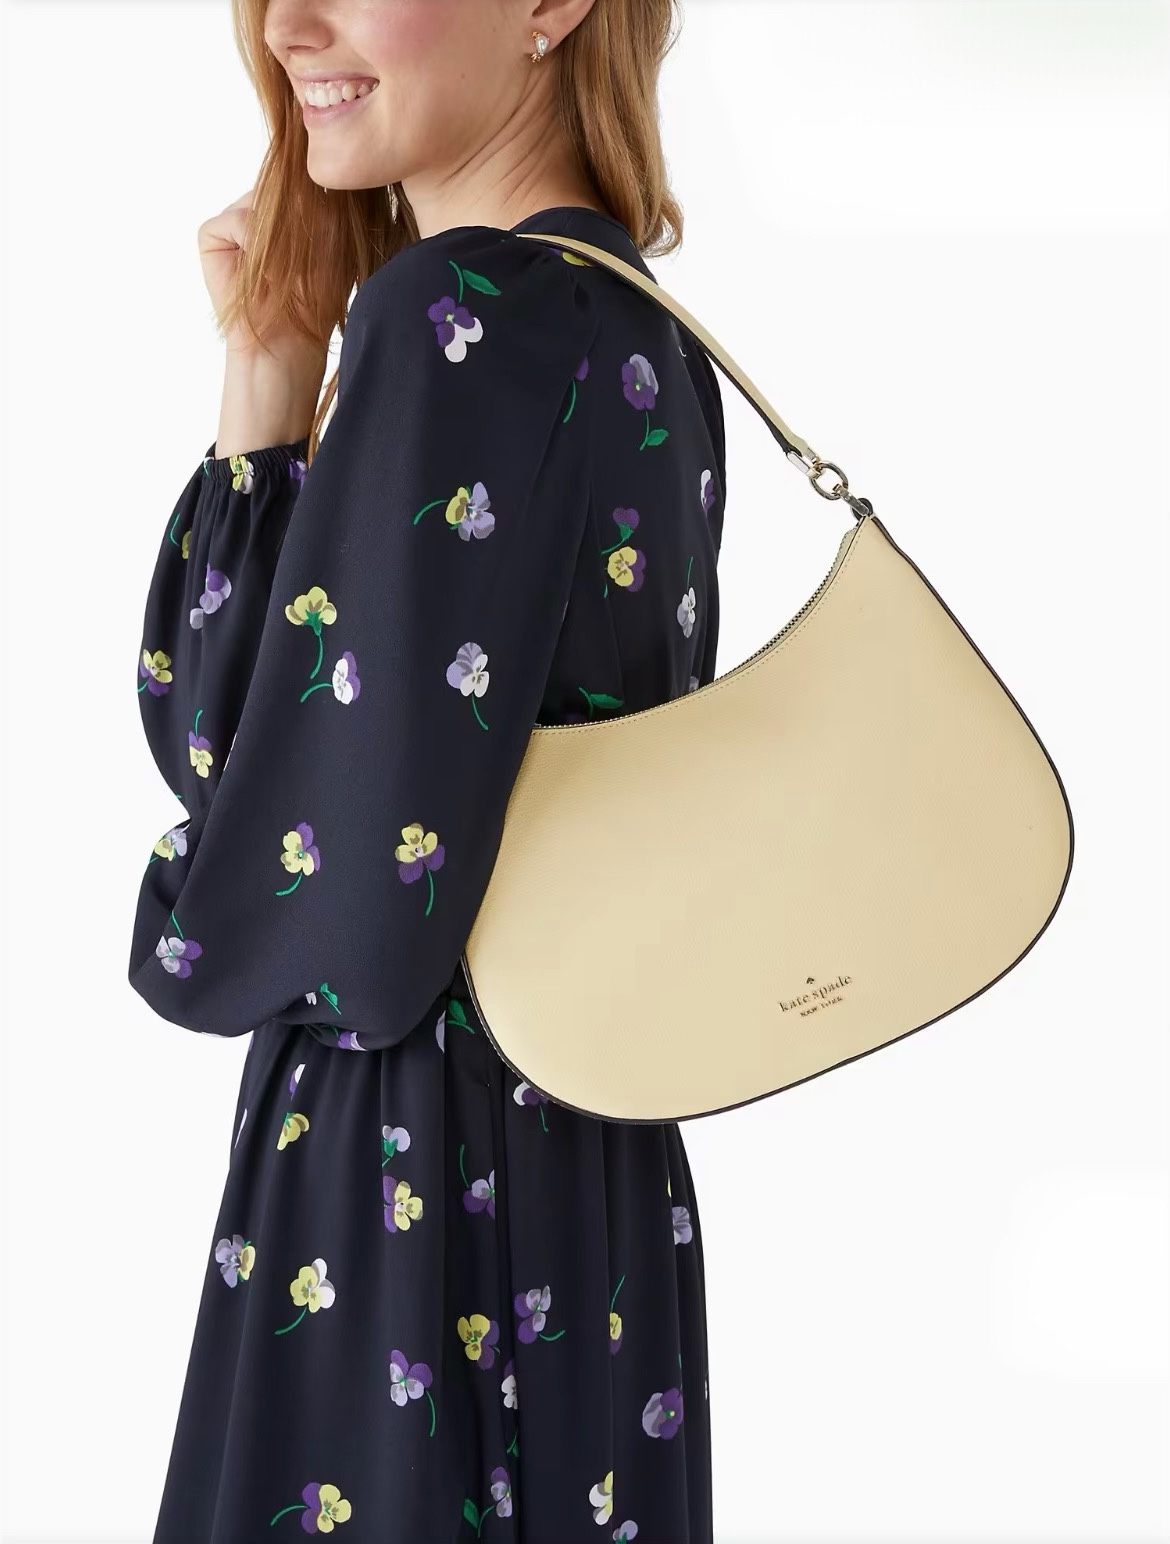 Kate Spade Kristi Shoulder Bags $79 Shipped Today Only - Couponing with  Rachel